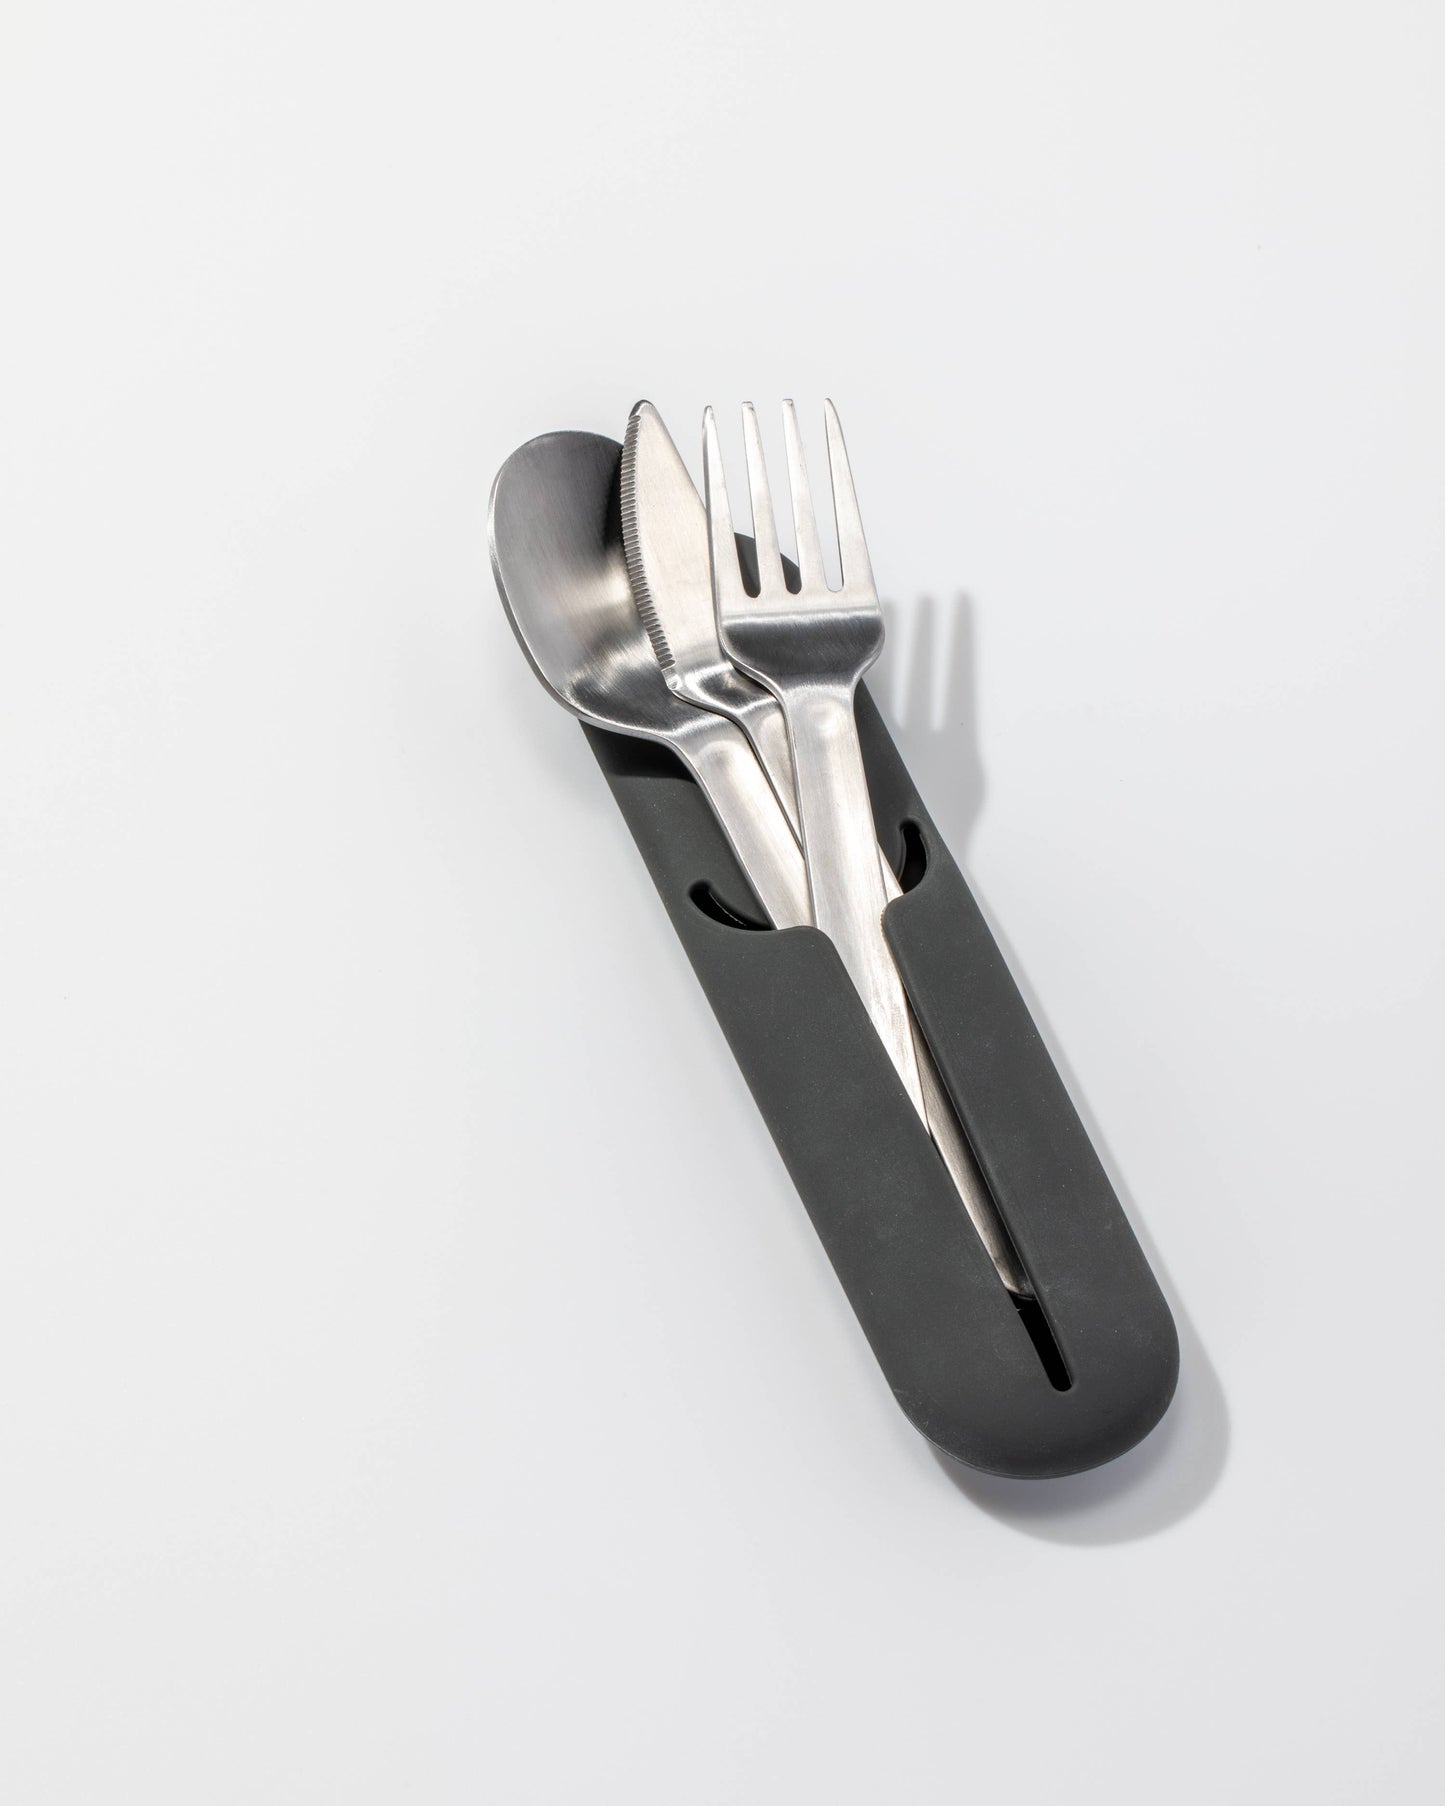 W&P - Stainless Steel Utensil Set in Silicone Carry Case: Terrazzo Charcoal